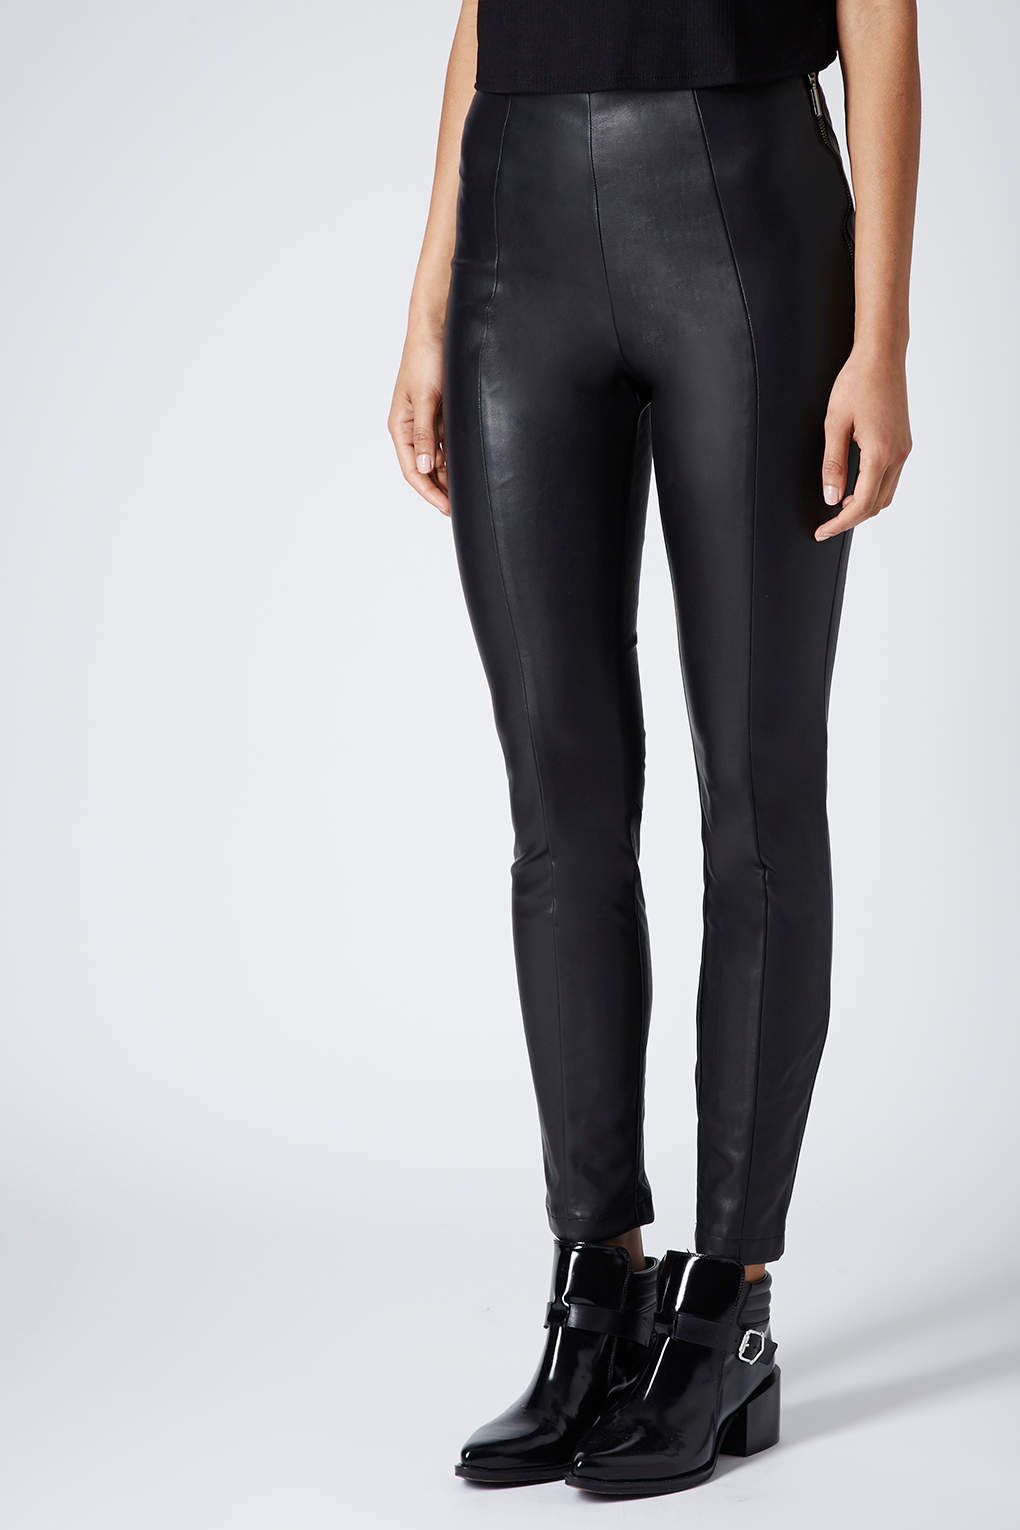 Lyst - Topshop Super Soft Leather Look Skinny Trousers in Black